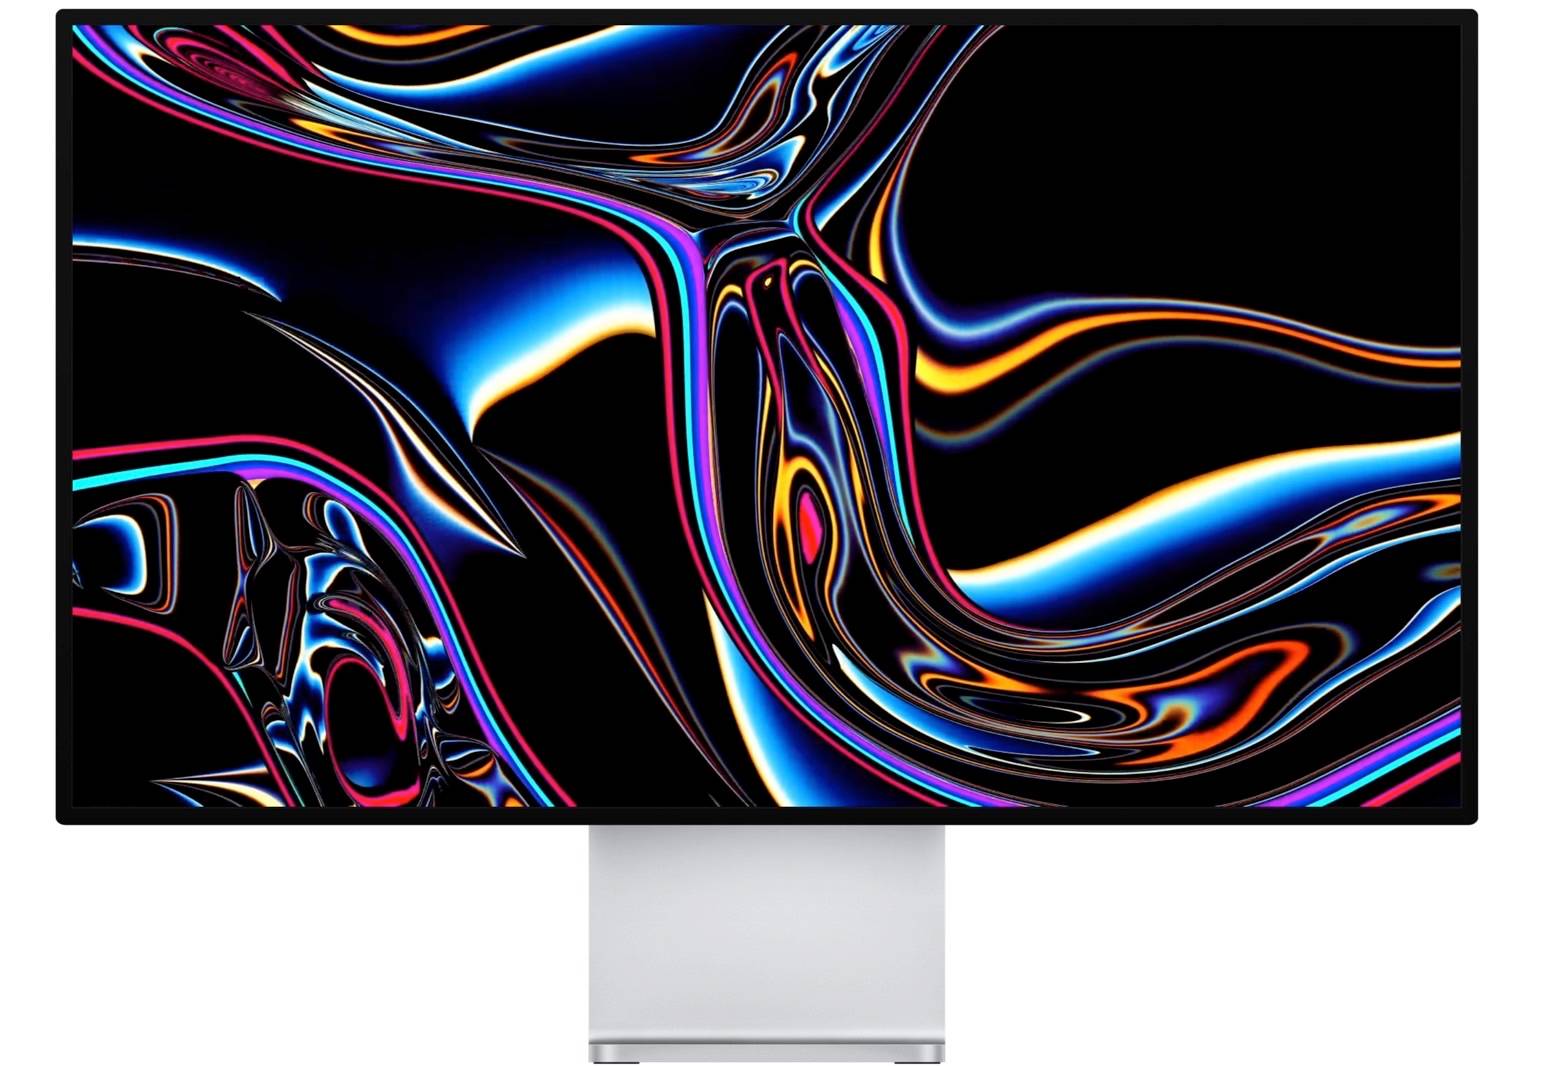 Leaker says Apple’s new iMac will glean this surprising upgrade